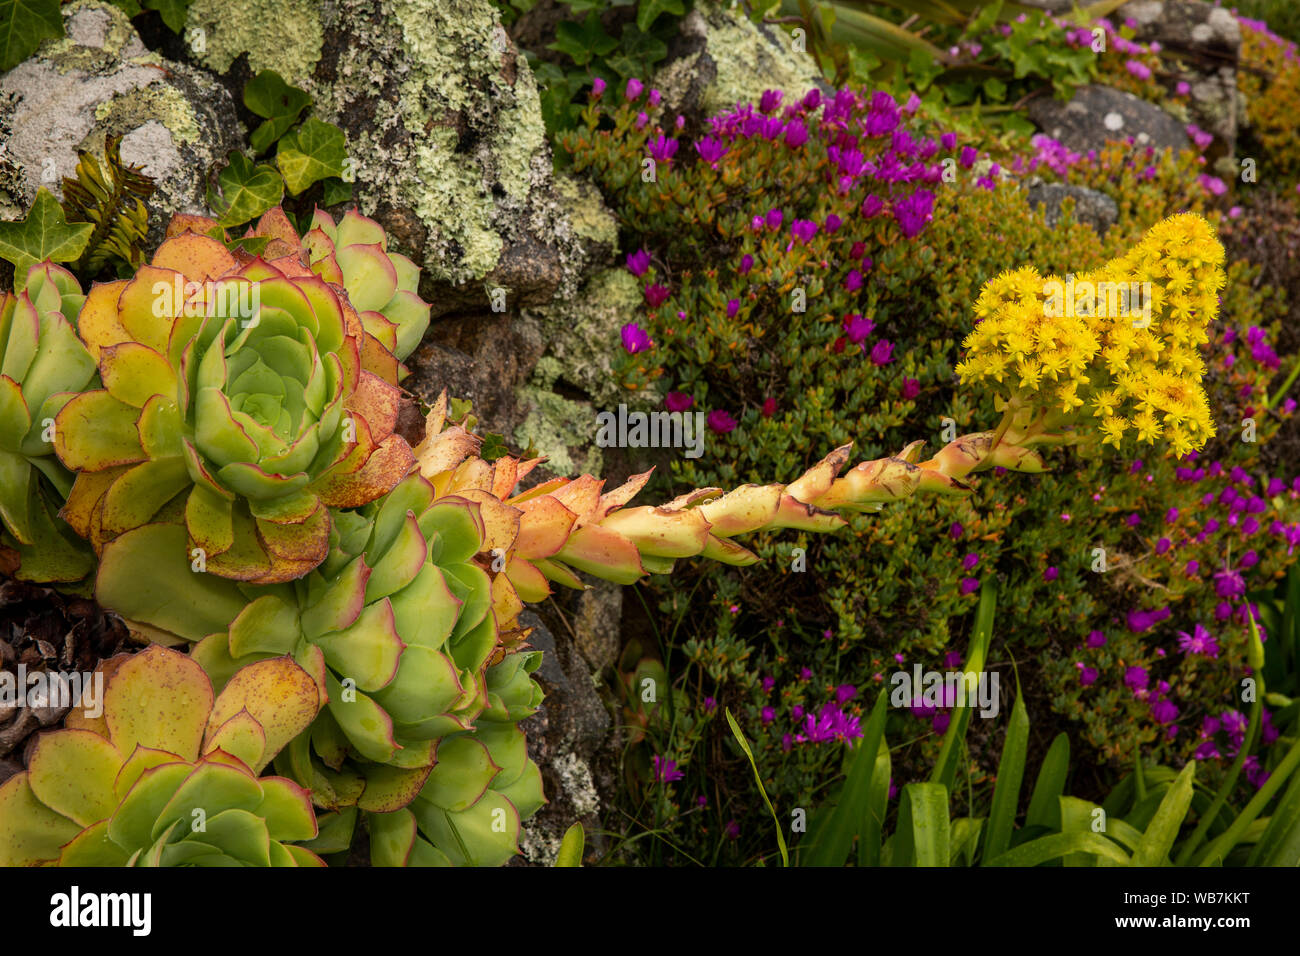 UK, England, Scilly Islands, Tresco, Abbey Gardens, yellow flower & leaves of succulent Aeonium arboreum, growing in stone wall Stock Photo